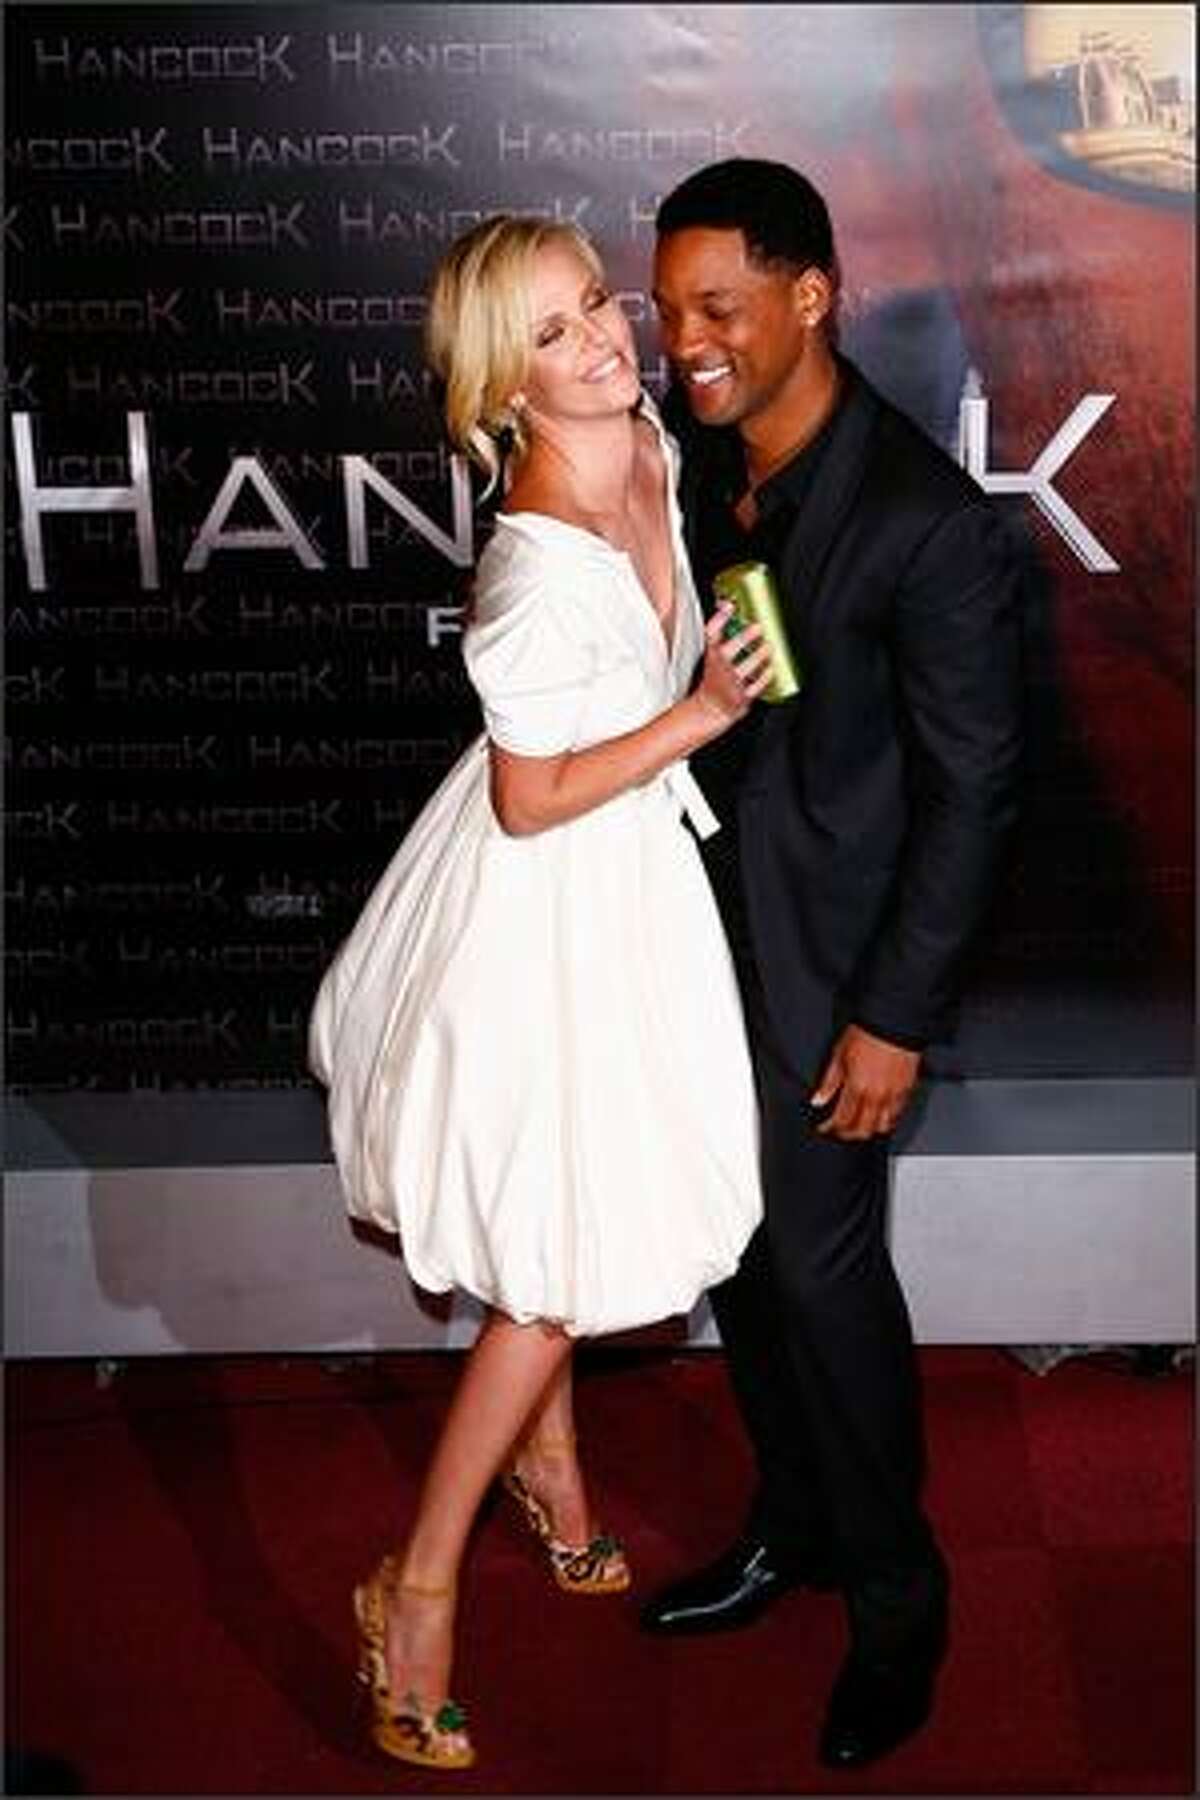 Charlize Theron and Will Smith attend the movie premiere of "Hancock" at L'Olympia Hall in Paris, France.